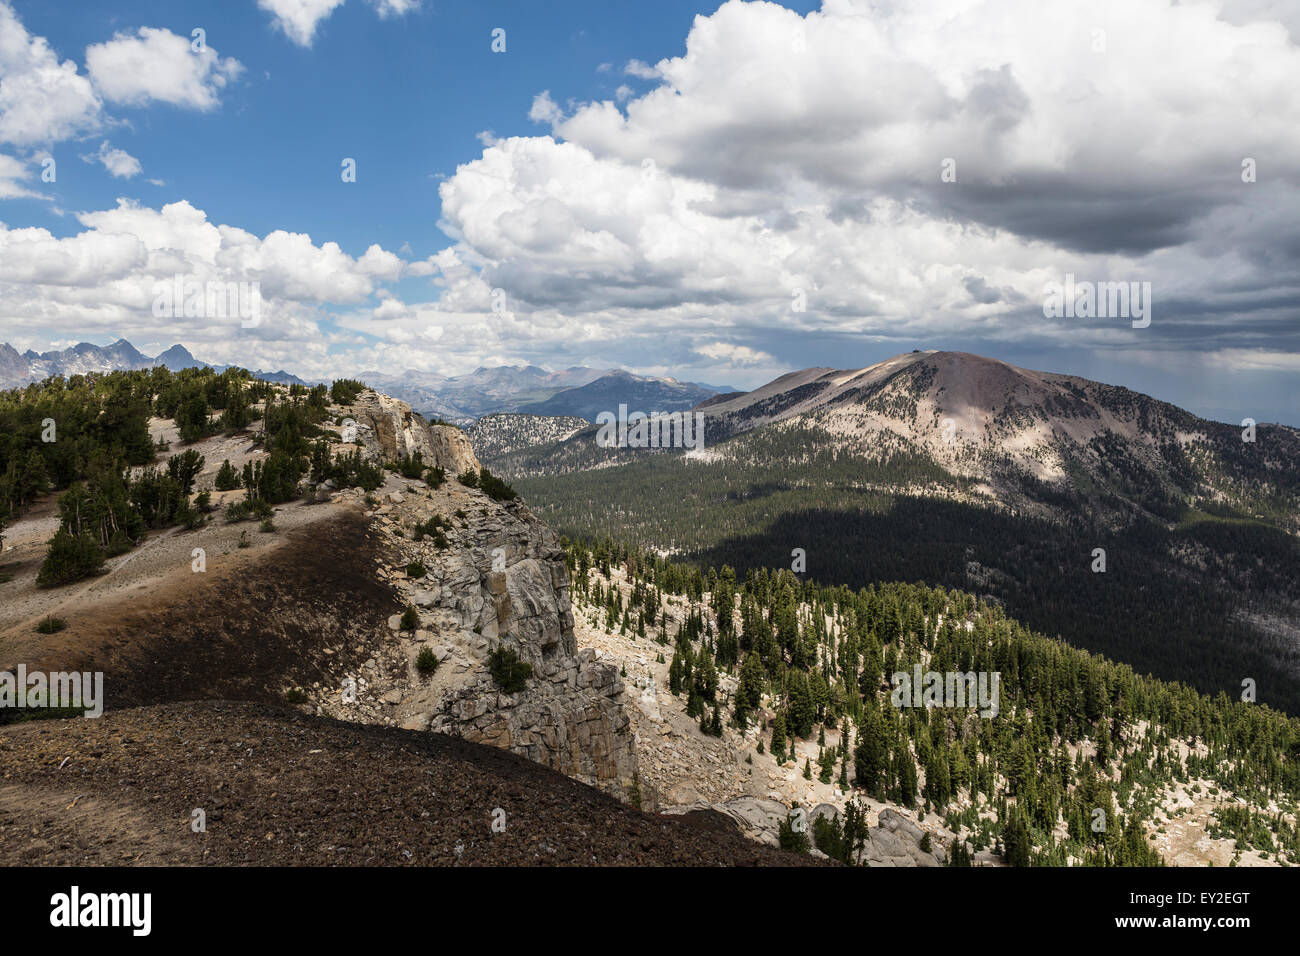 View towards Mammoth Mountain from the Mammoth Crest Trail in California's Sierra Nevada Mountain Range. Stock Photo